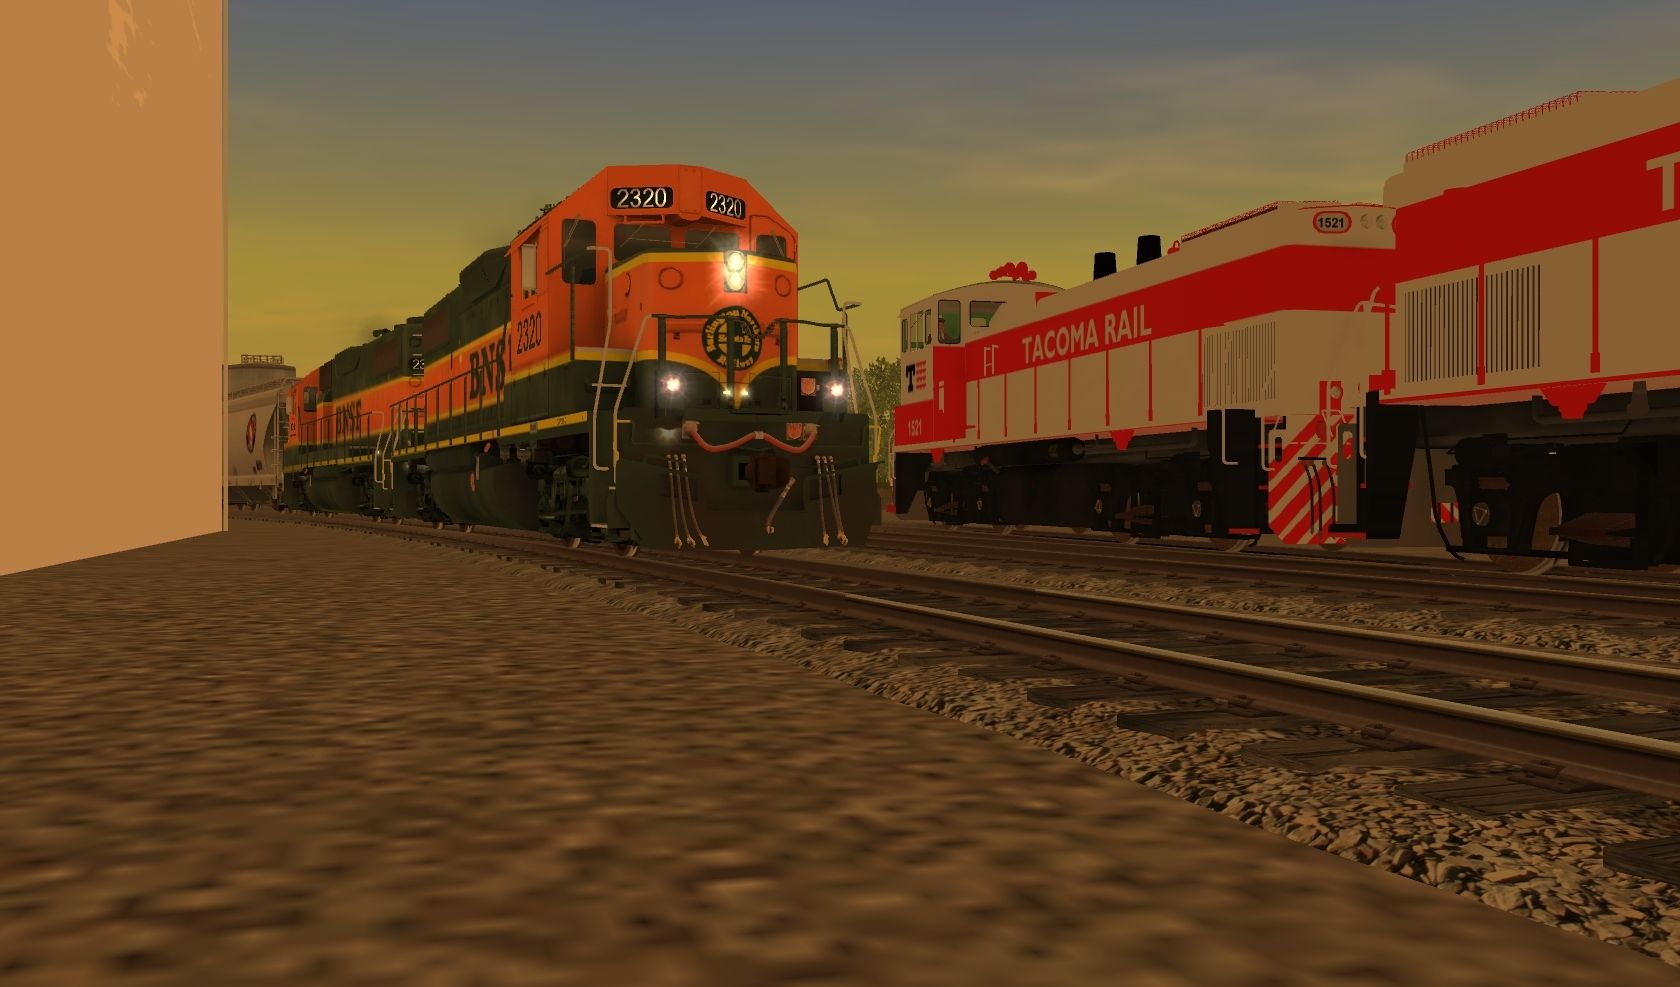 BNSF-2320-brings-an-interchange-in-through-the-Bullfrog-Wye%2C-while-TR-1521-%26-1523-take-wellcars-to-Pacific-Rail-Services-for-loading..jpg